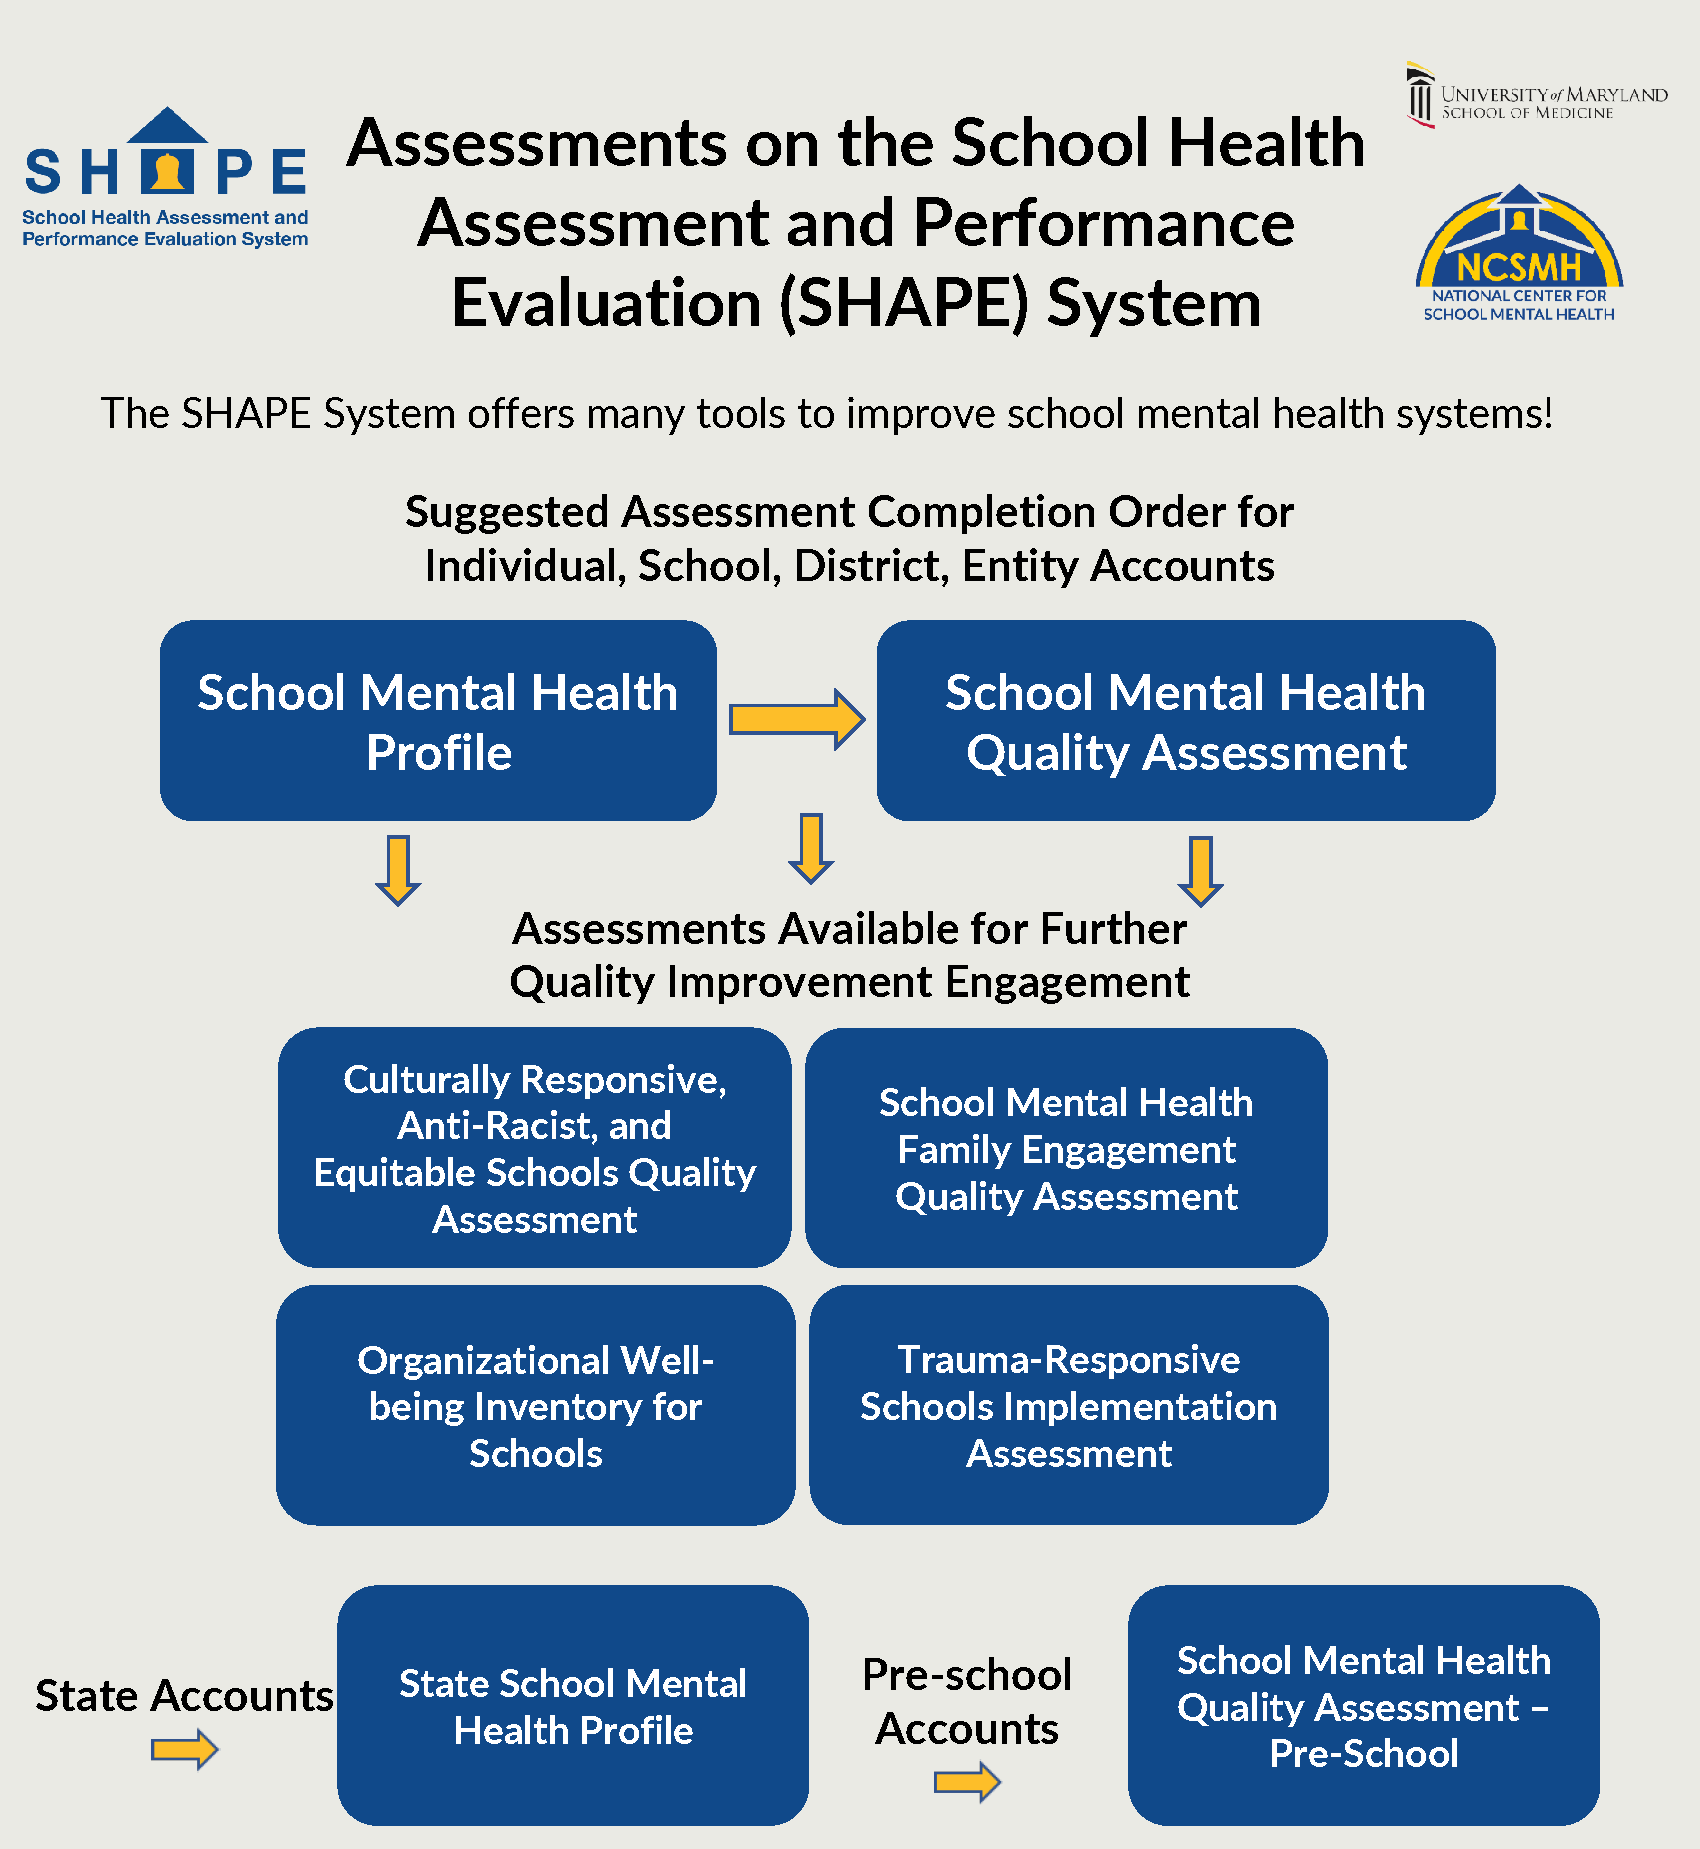 Assessments on SHAPE. The SHAPE System offers many tools to improve school mental health systems! Suggested Assessments Completion Order for Individual, School, District, or Entity Accounts: 1) School Mental Health Profile & School Mental Health Quality Assessment